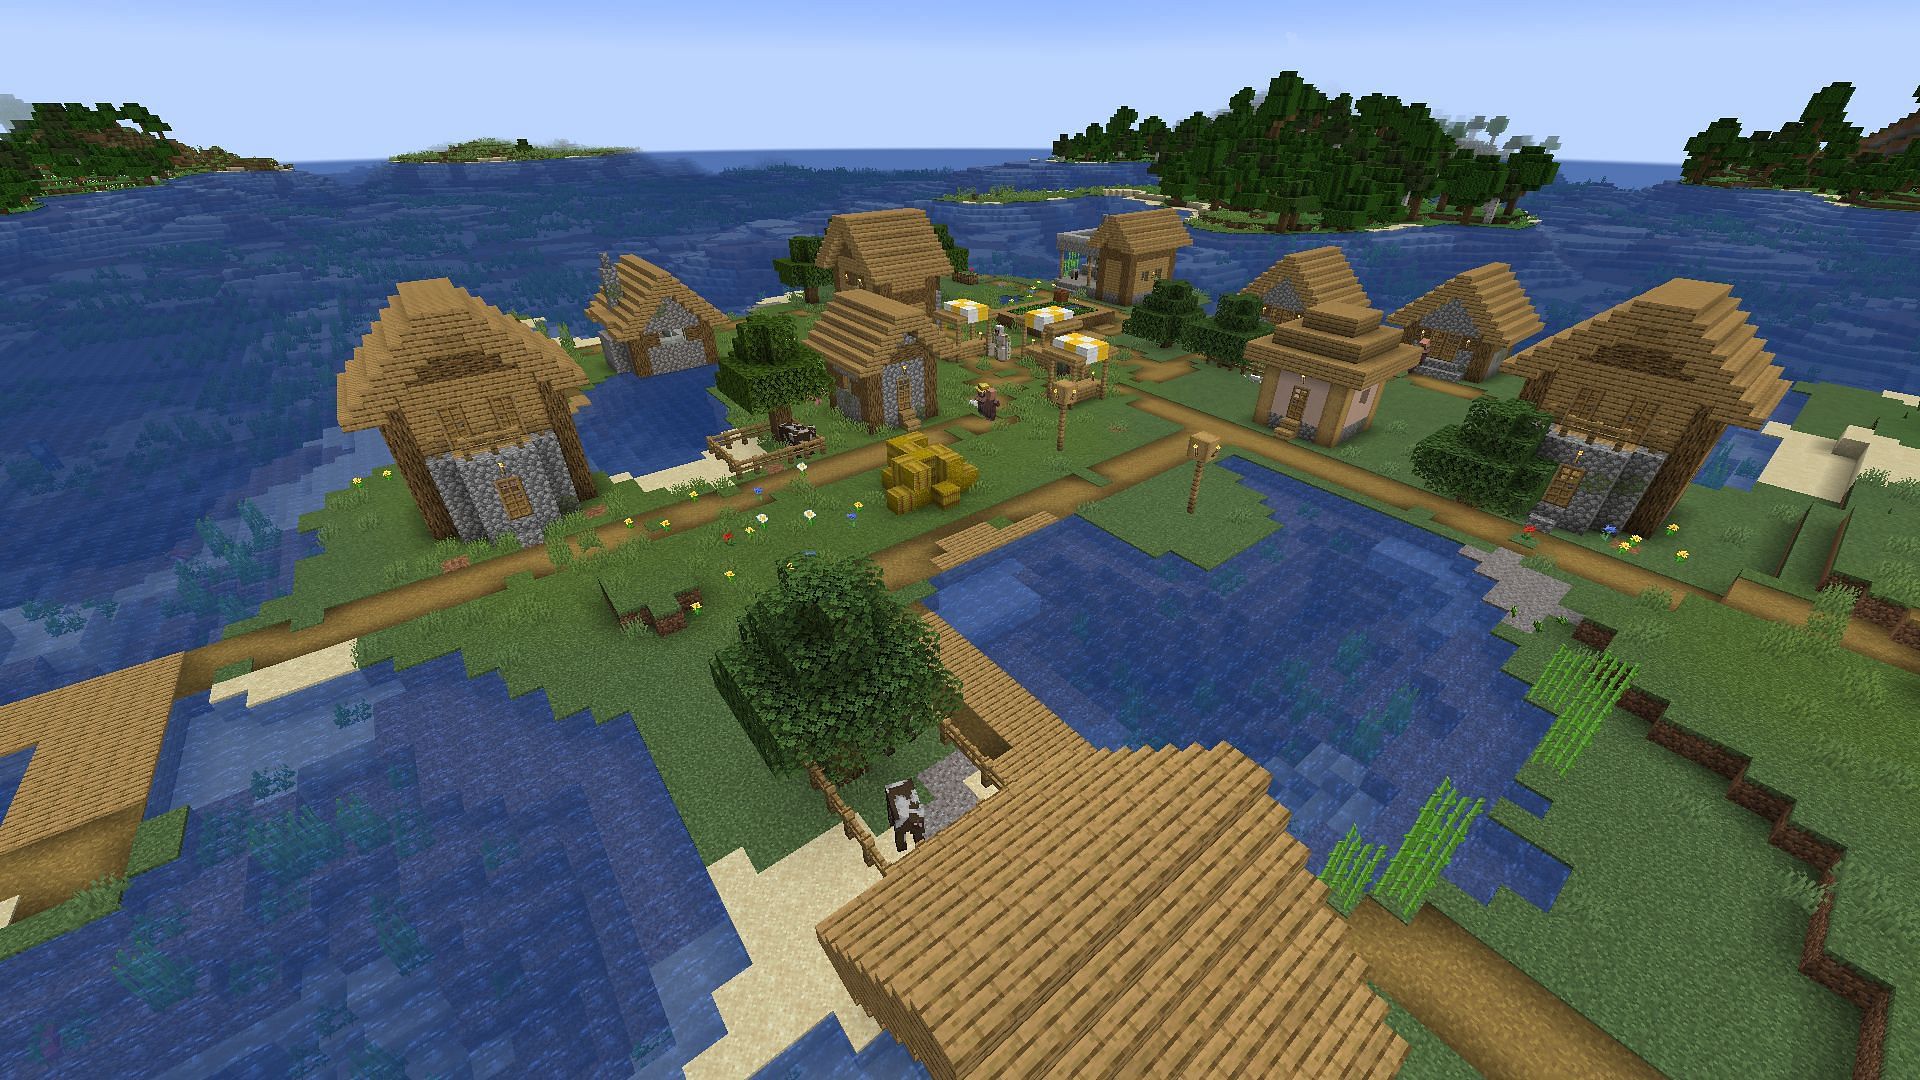 This Minecraft seed&#039;s spawn village has plenty of river nearby that presents interesting build opportunities (Image via Mojang)